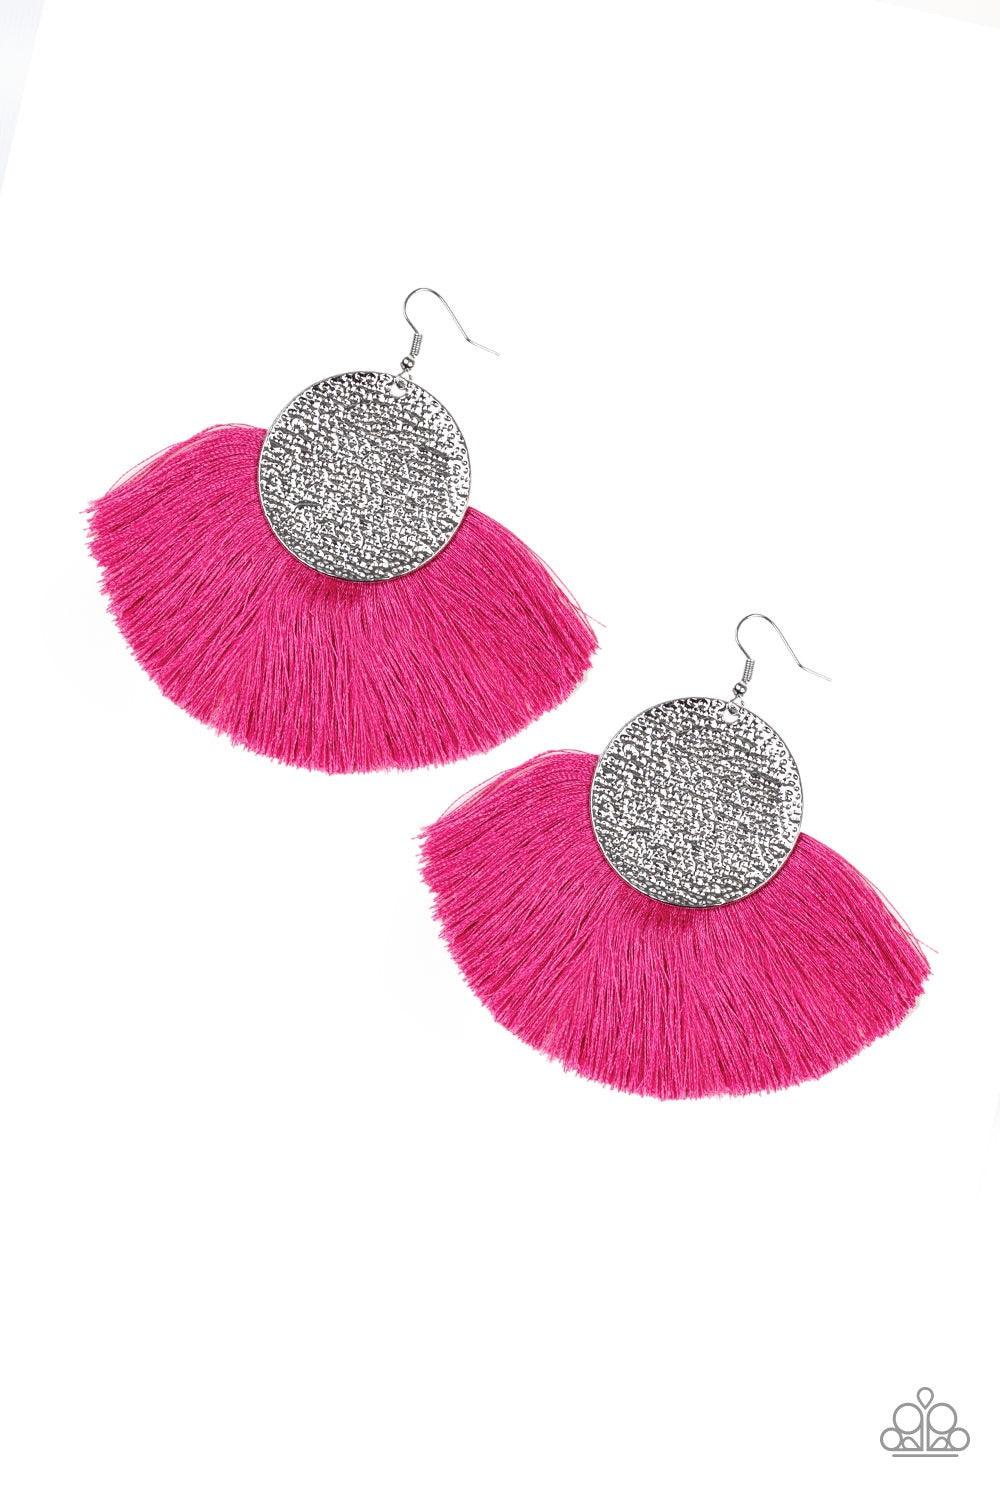 Paparazzi Accessories Foxtrot Fringe - Pink A fan of shiny pink thread flares out from the bottom of a hammered silver disc, creating a foxy fringe. Earring attaches to a standard fishhook fitting. Jewelry